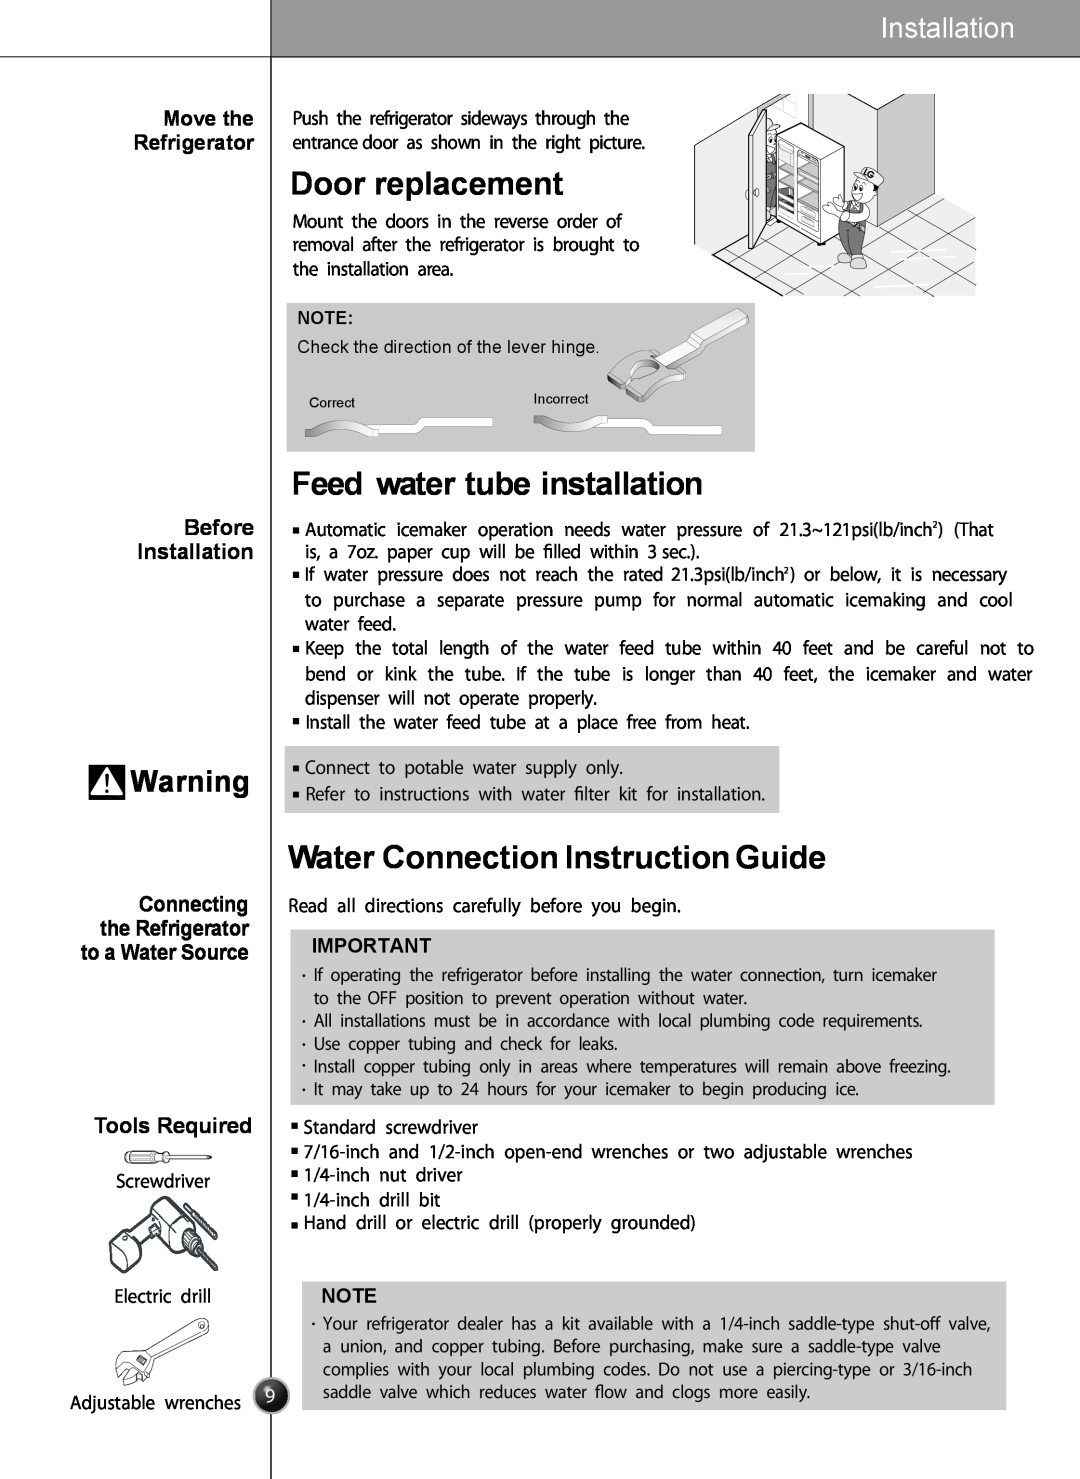 LG Electronics LSC26905 Door replacement, Feed water tube installation, Water Connection Instruction Guide, Installation 